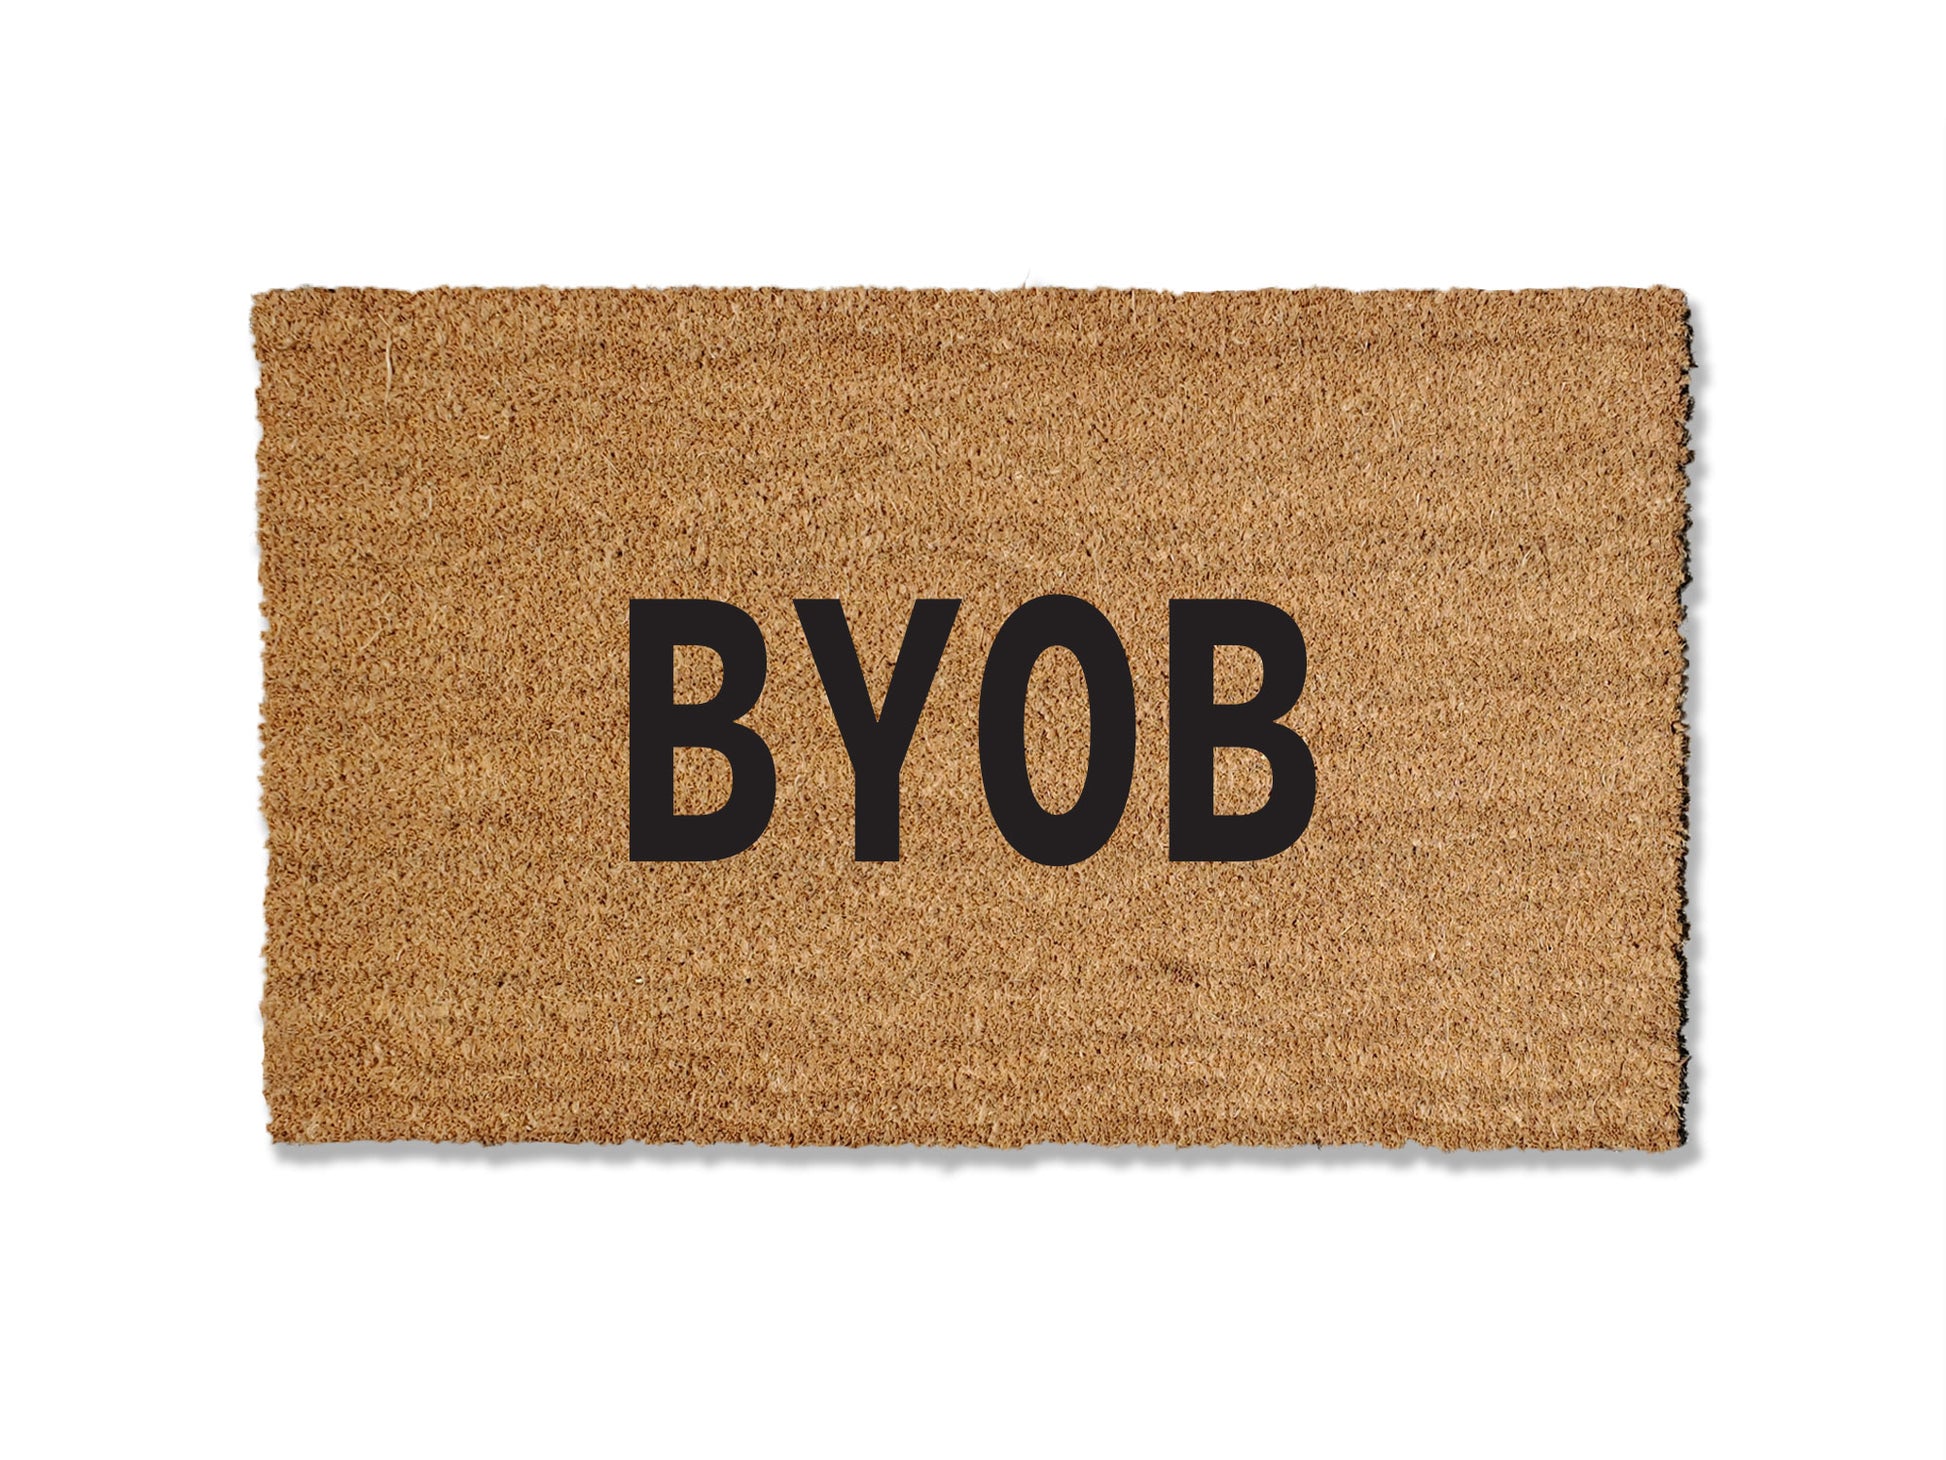 Custom 1/2 inch thick coir doormat with a playful 'BYOB' design, perfect for football season. This personalized mat adds a touch of fun to your entryway while efficiently trapping dirt, making it a stylish and functional choice for welcoming guests during the sports season.